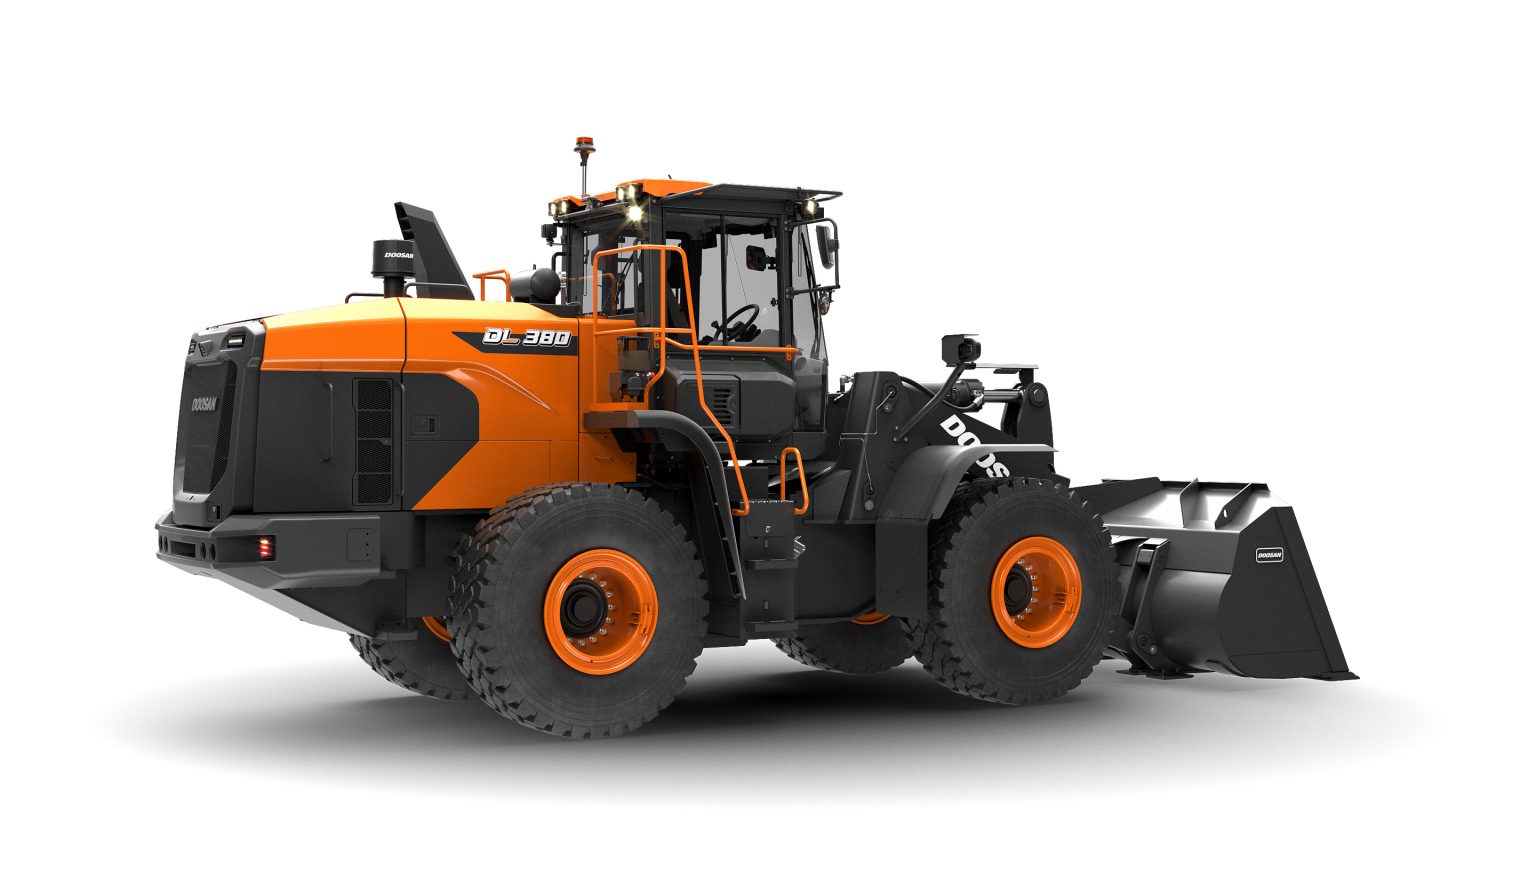 Doosan Infracores New Wheel Loader Model To Lift Greater Loads Rock To Roadrock To Road 5223